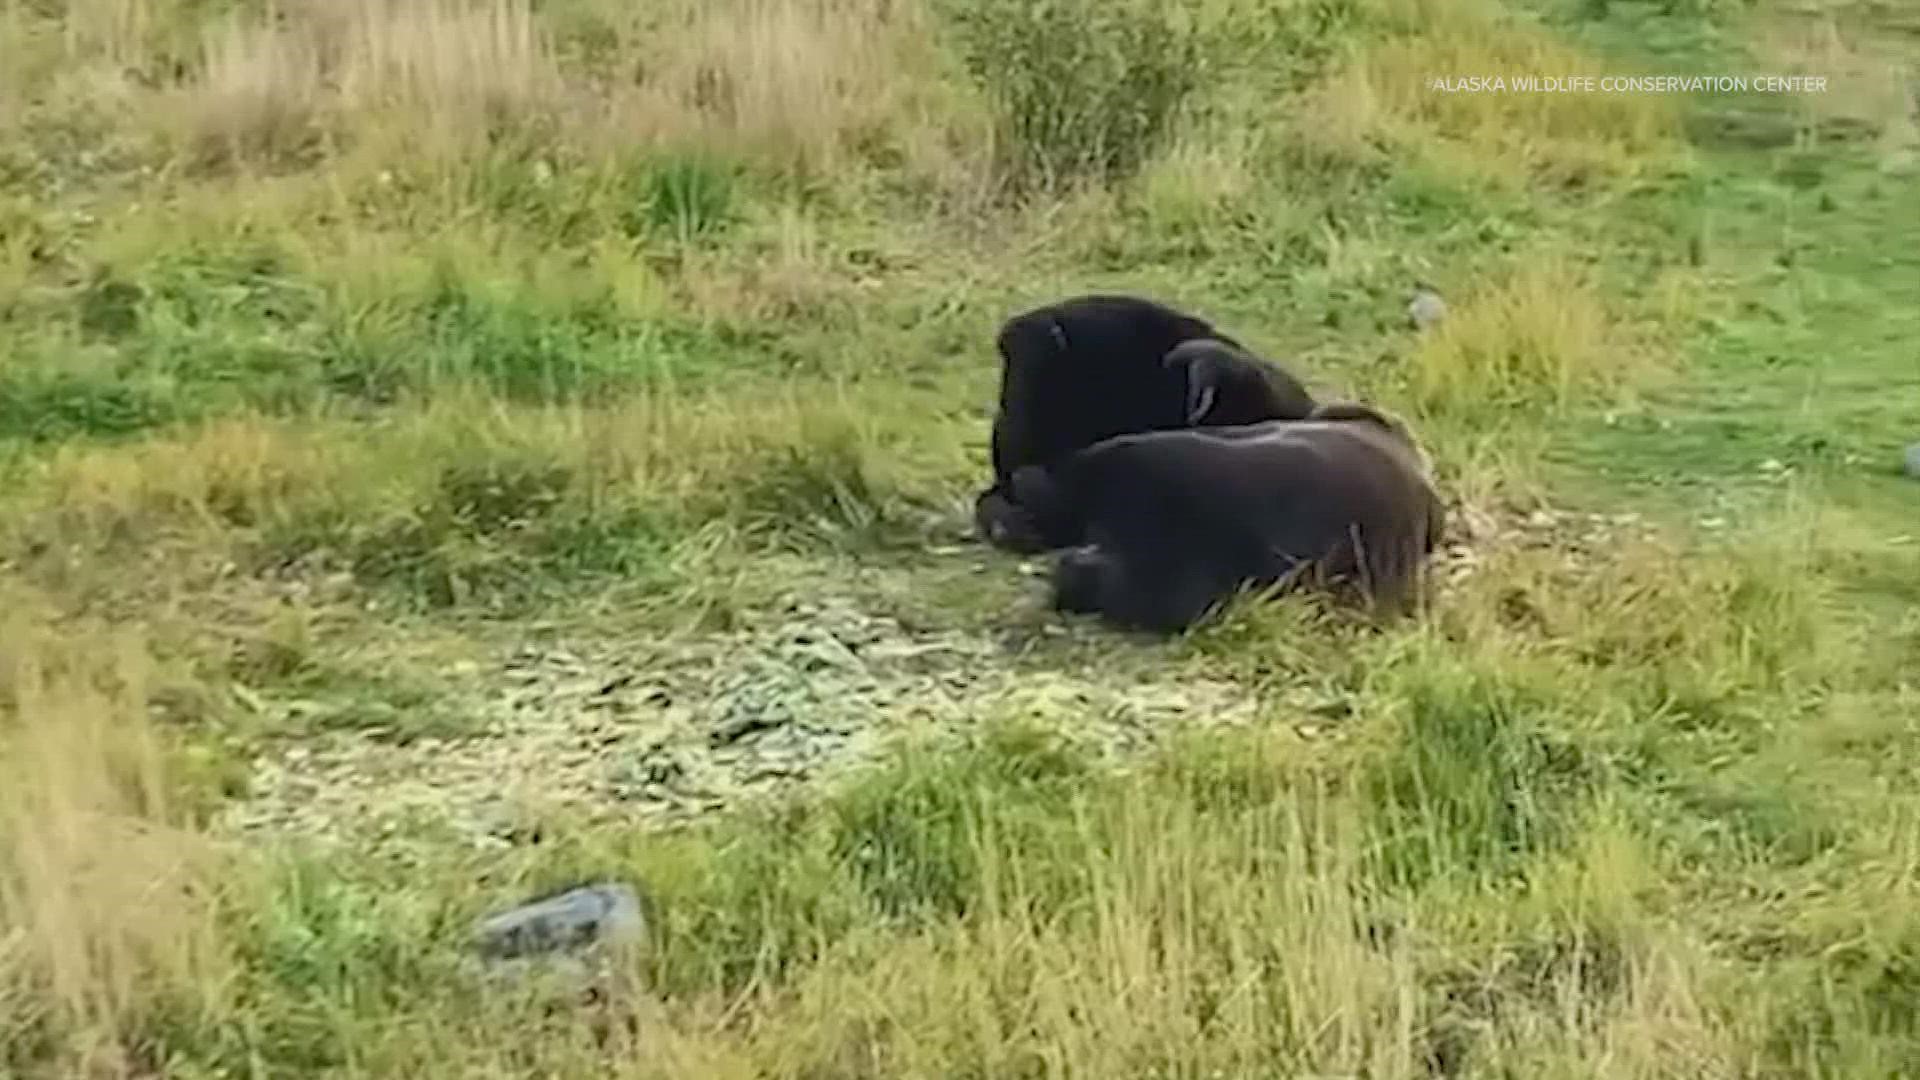 Video is from the Alaska Wildlife Conservation Center.